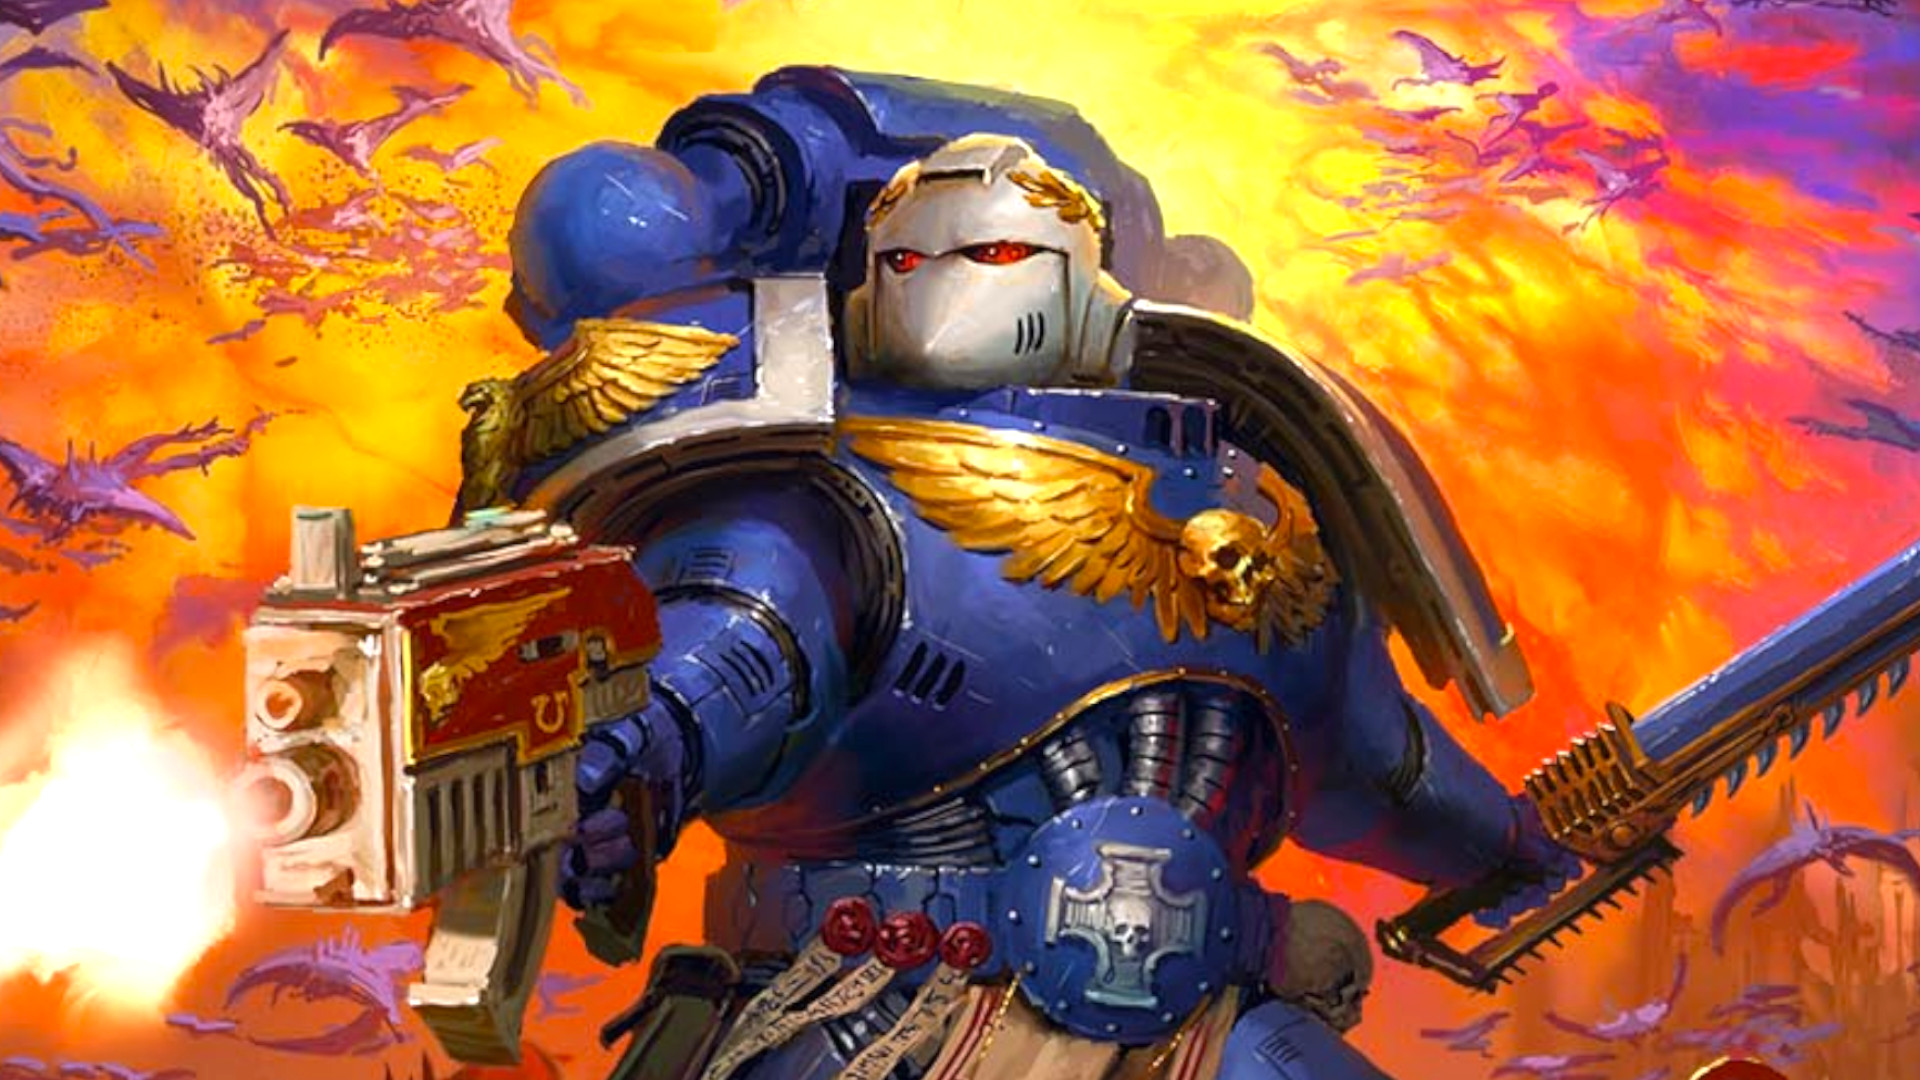 Warhammer 40k Boltgun's new DLC adds the mode you asked for